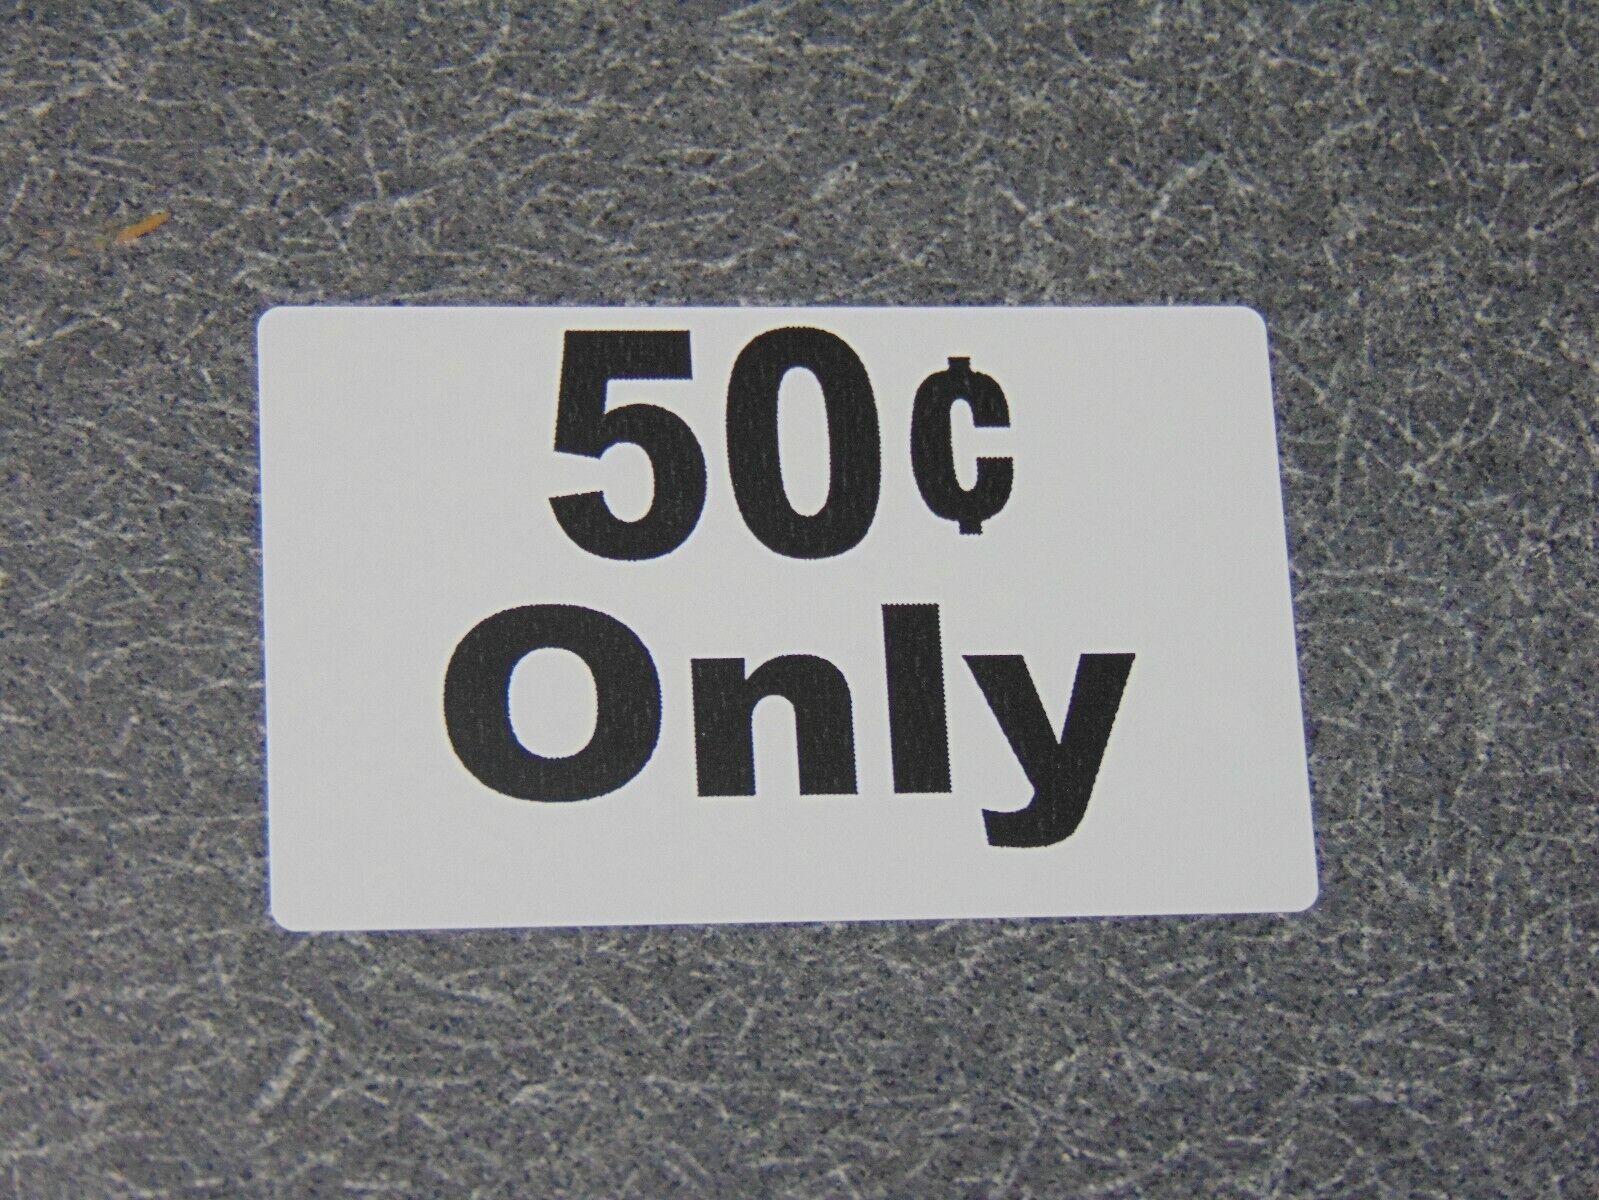  1 New 50 Cent Decal Sticker. Arcade Game, Skee Ball, Gambling, Vending and Etc.